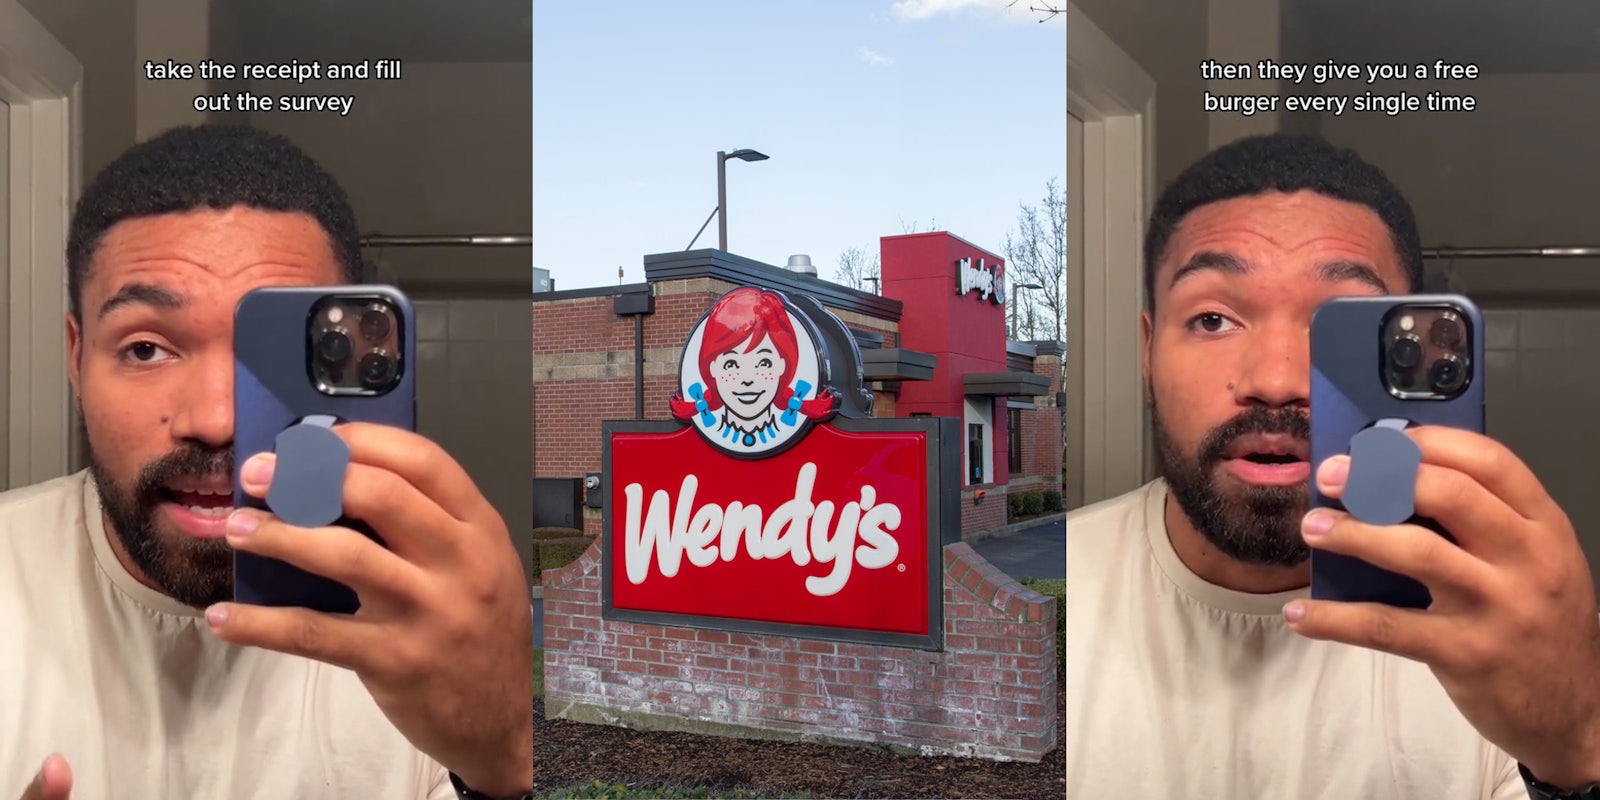 person speaking in bathroom mirror with caption 'take the receipt and fill out the survey' (l) Wendy's building with sign (c) person speaking in bathroom mirror with caption 'then they give you a free burger every single time' (r)